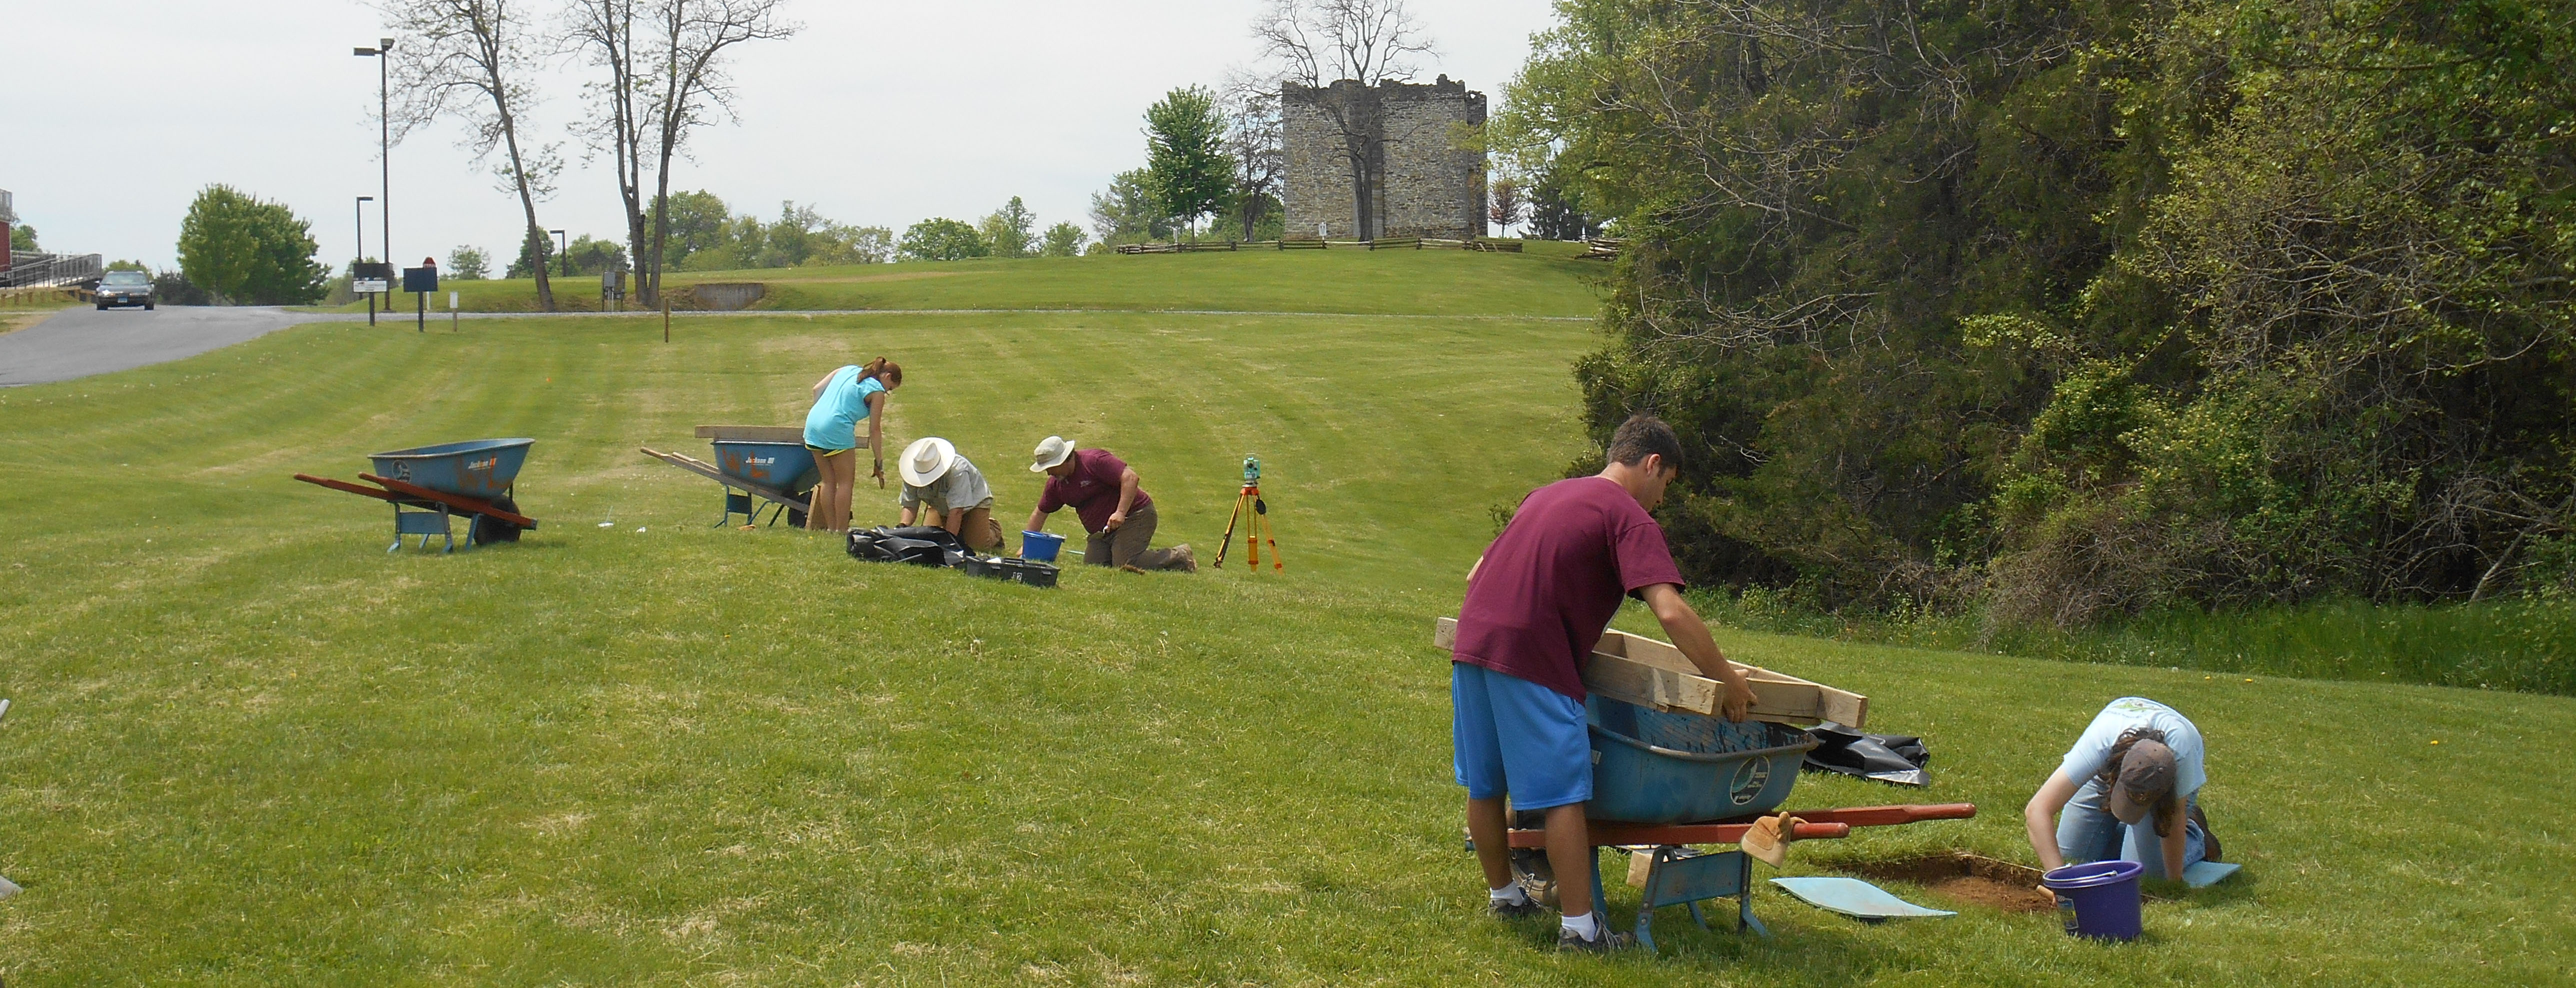 W&L students excavating at Liberty Hall during the Spring-Term field methods class in 2014.